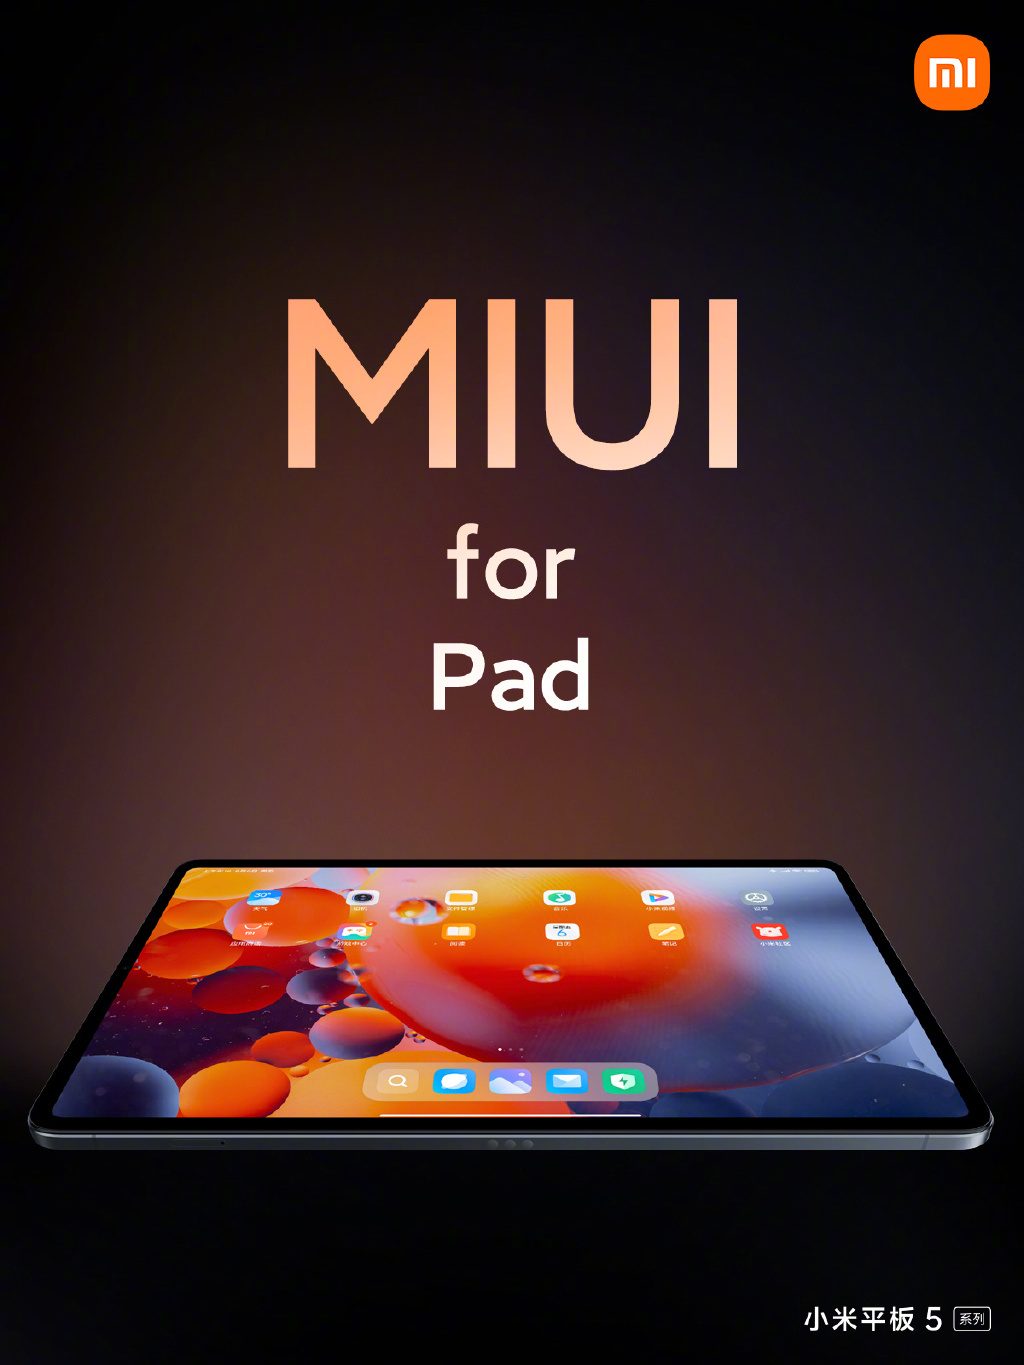 miui for pad